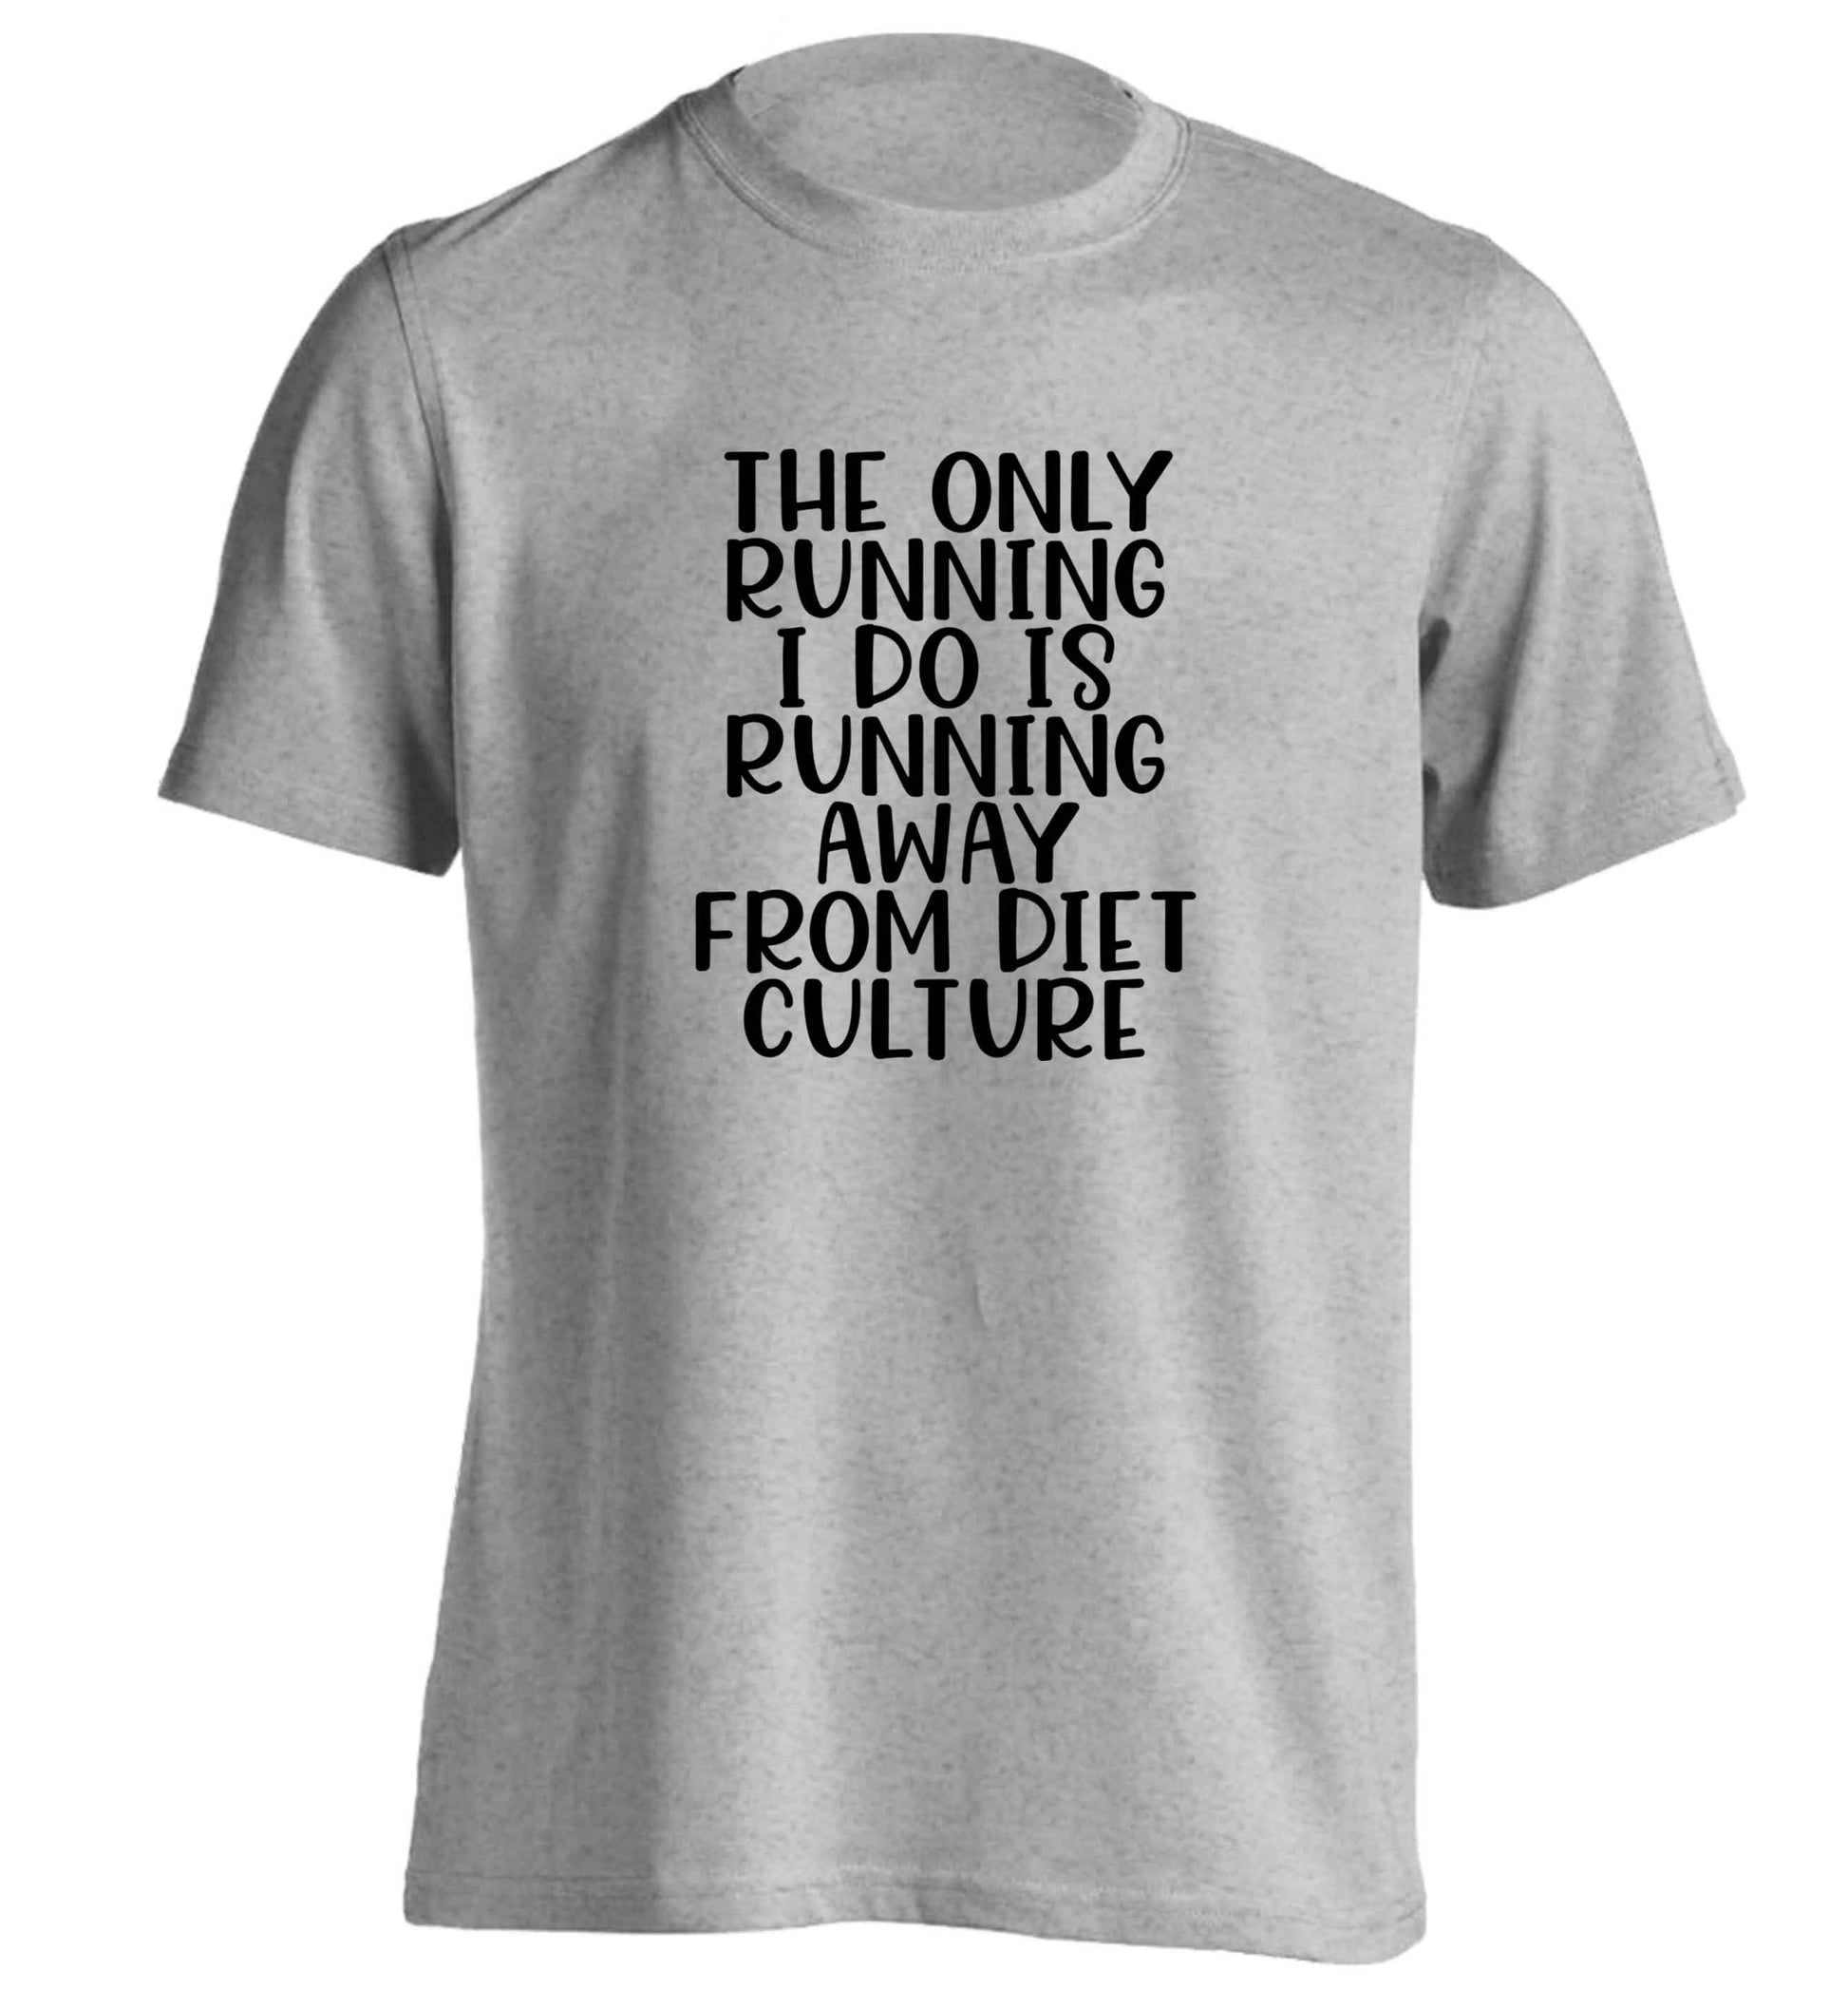 The only running I do is running away from diet culture adults unisex grey Tshirt 2XL